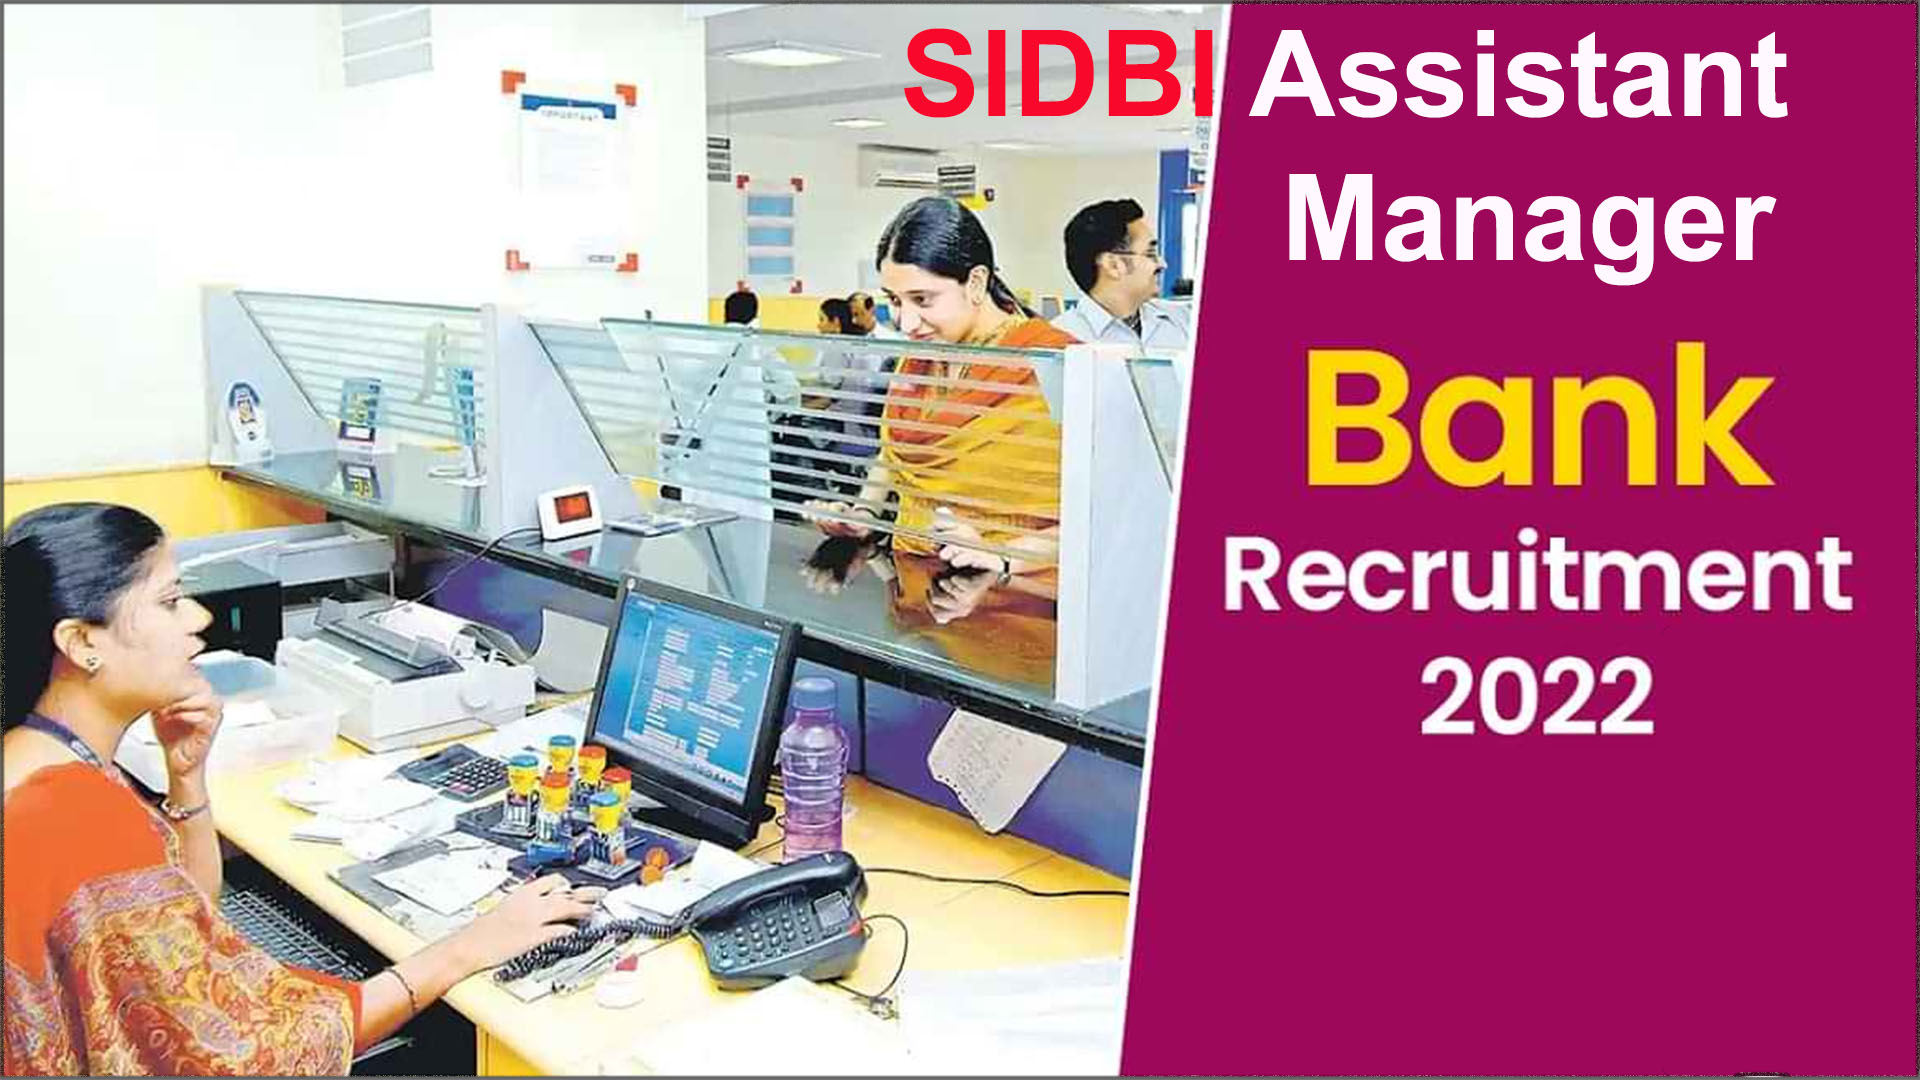 SIDBI Assistant Manager Recruitment 2022